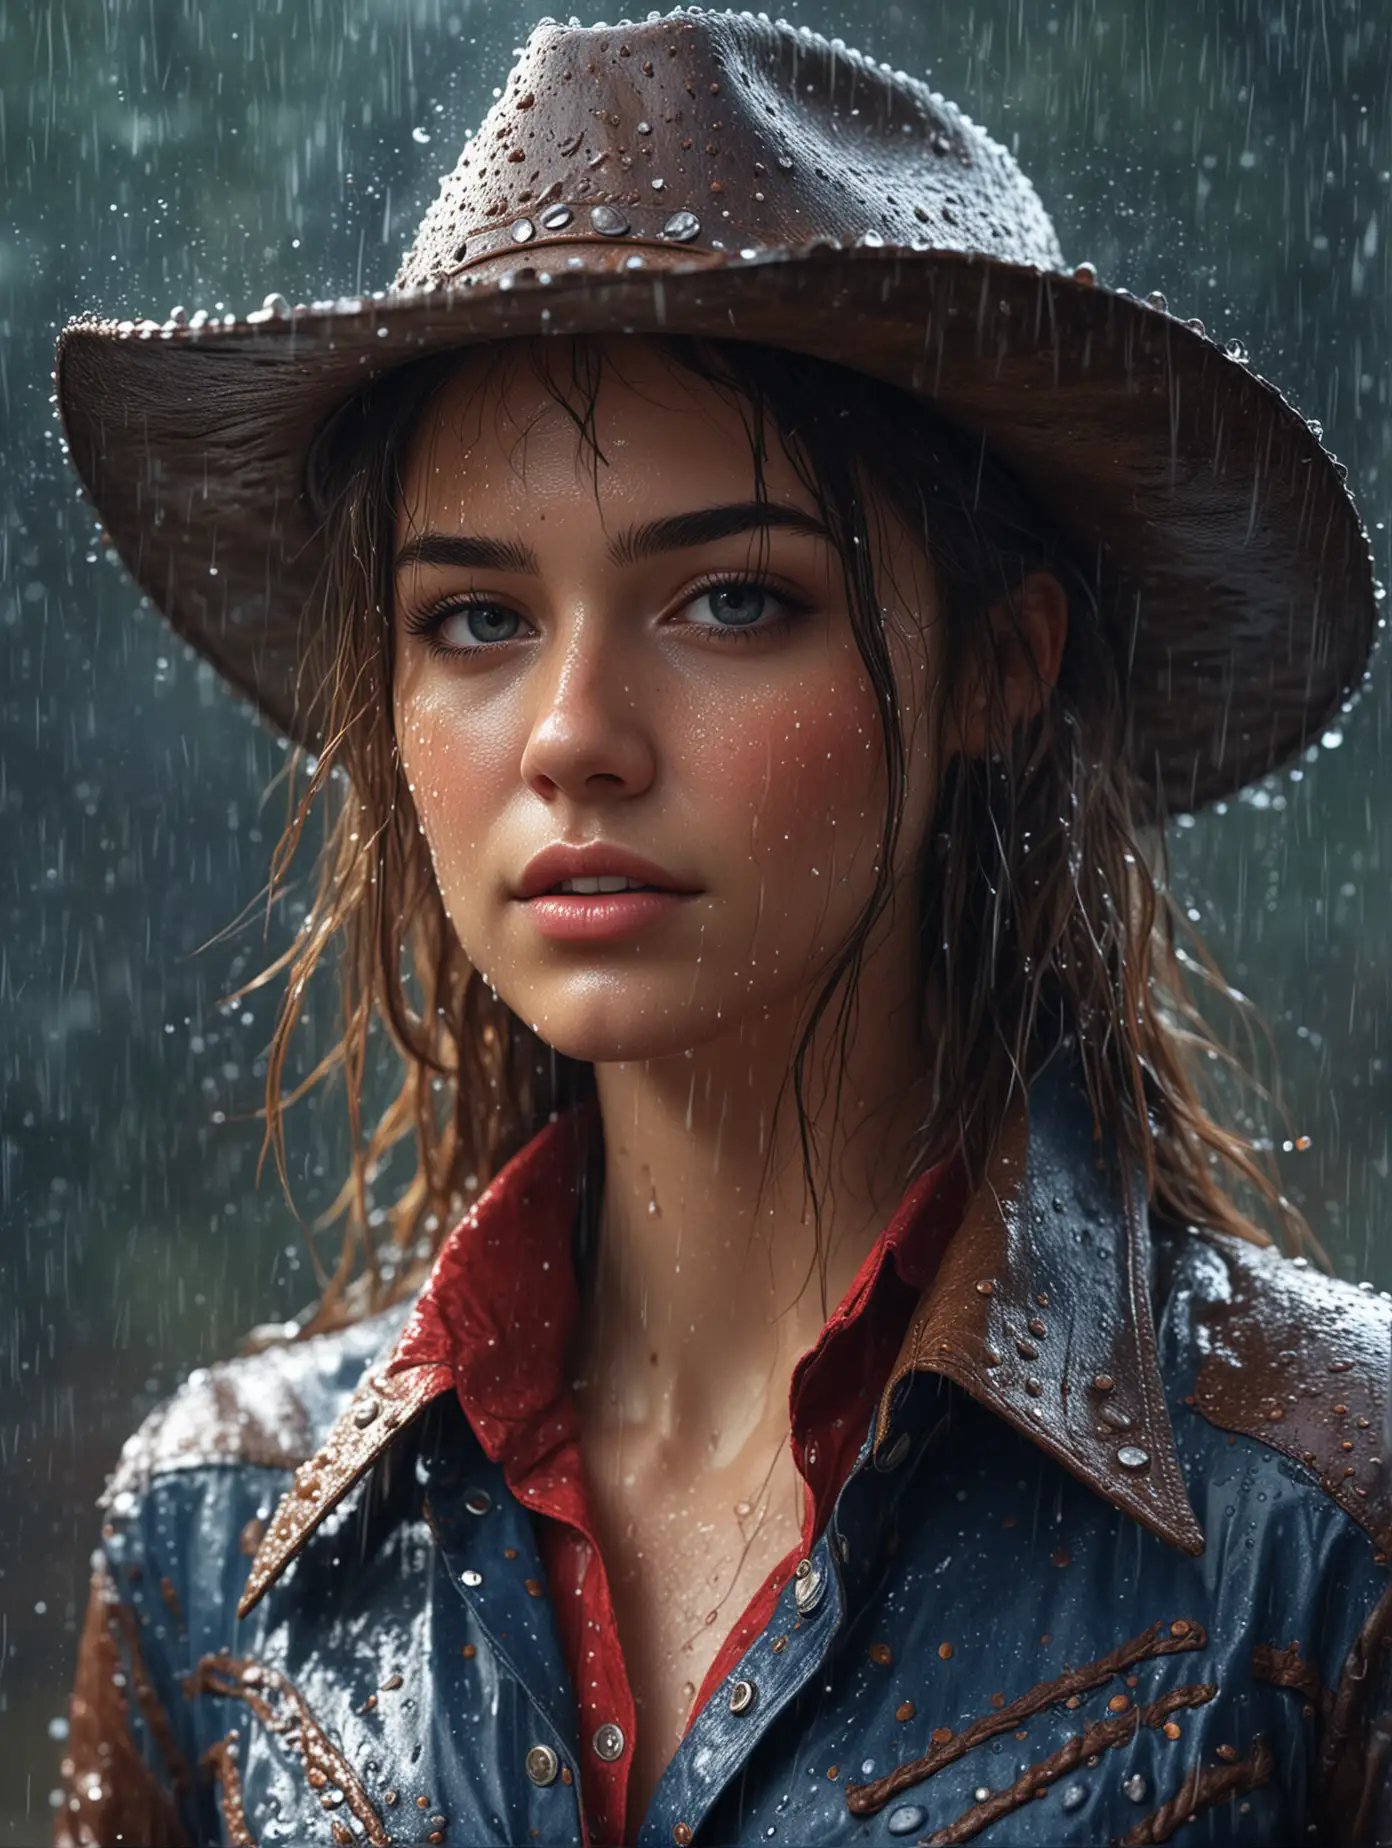 Beautiful-Girl-in-Cowboy-Outfit-Standing-in-Pouring-Rain